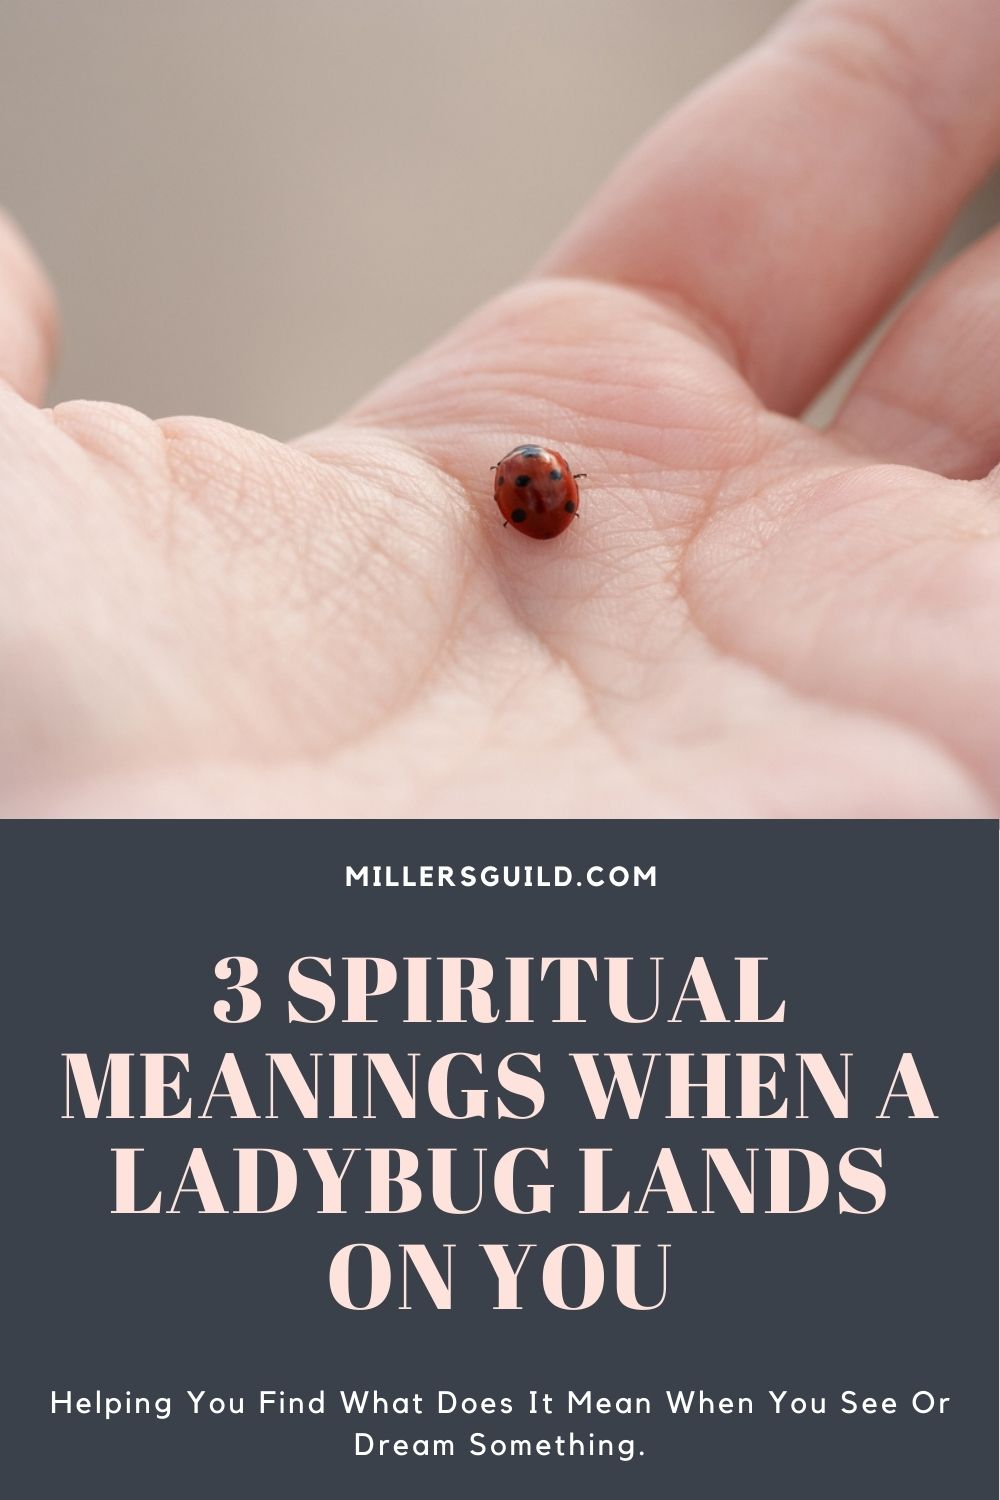 3 Spiritual Meanings When a Ladybug Lands on You